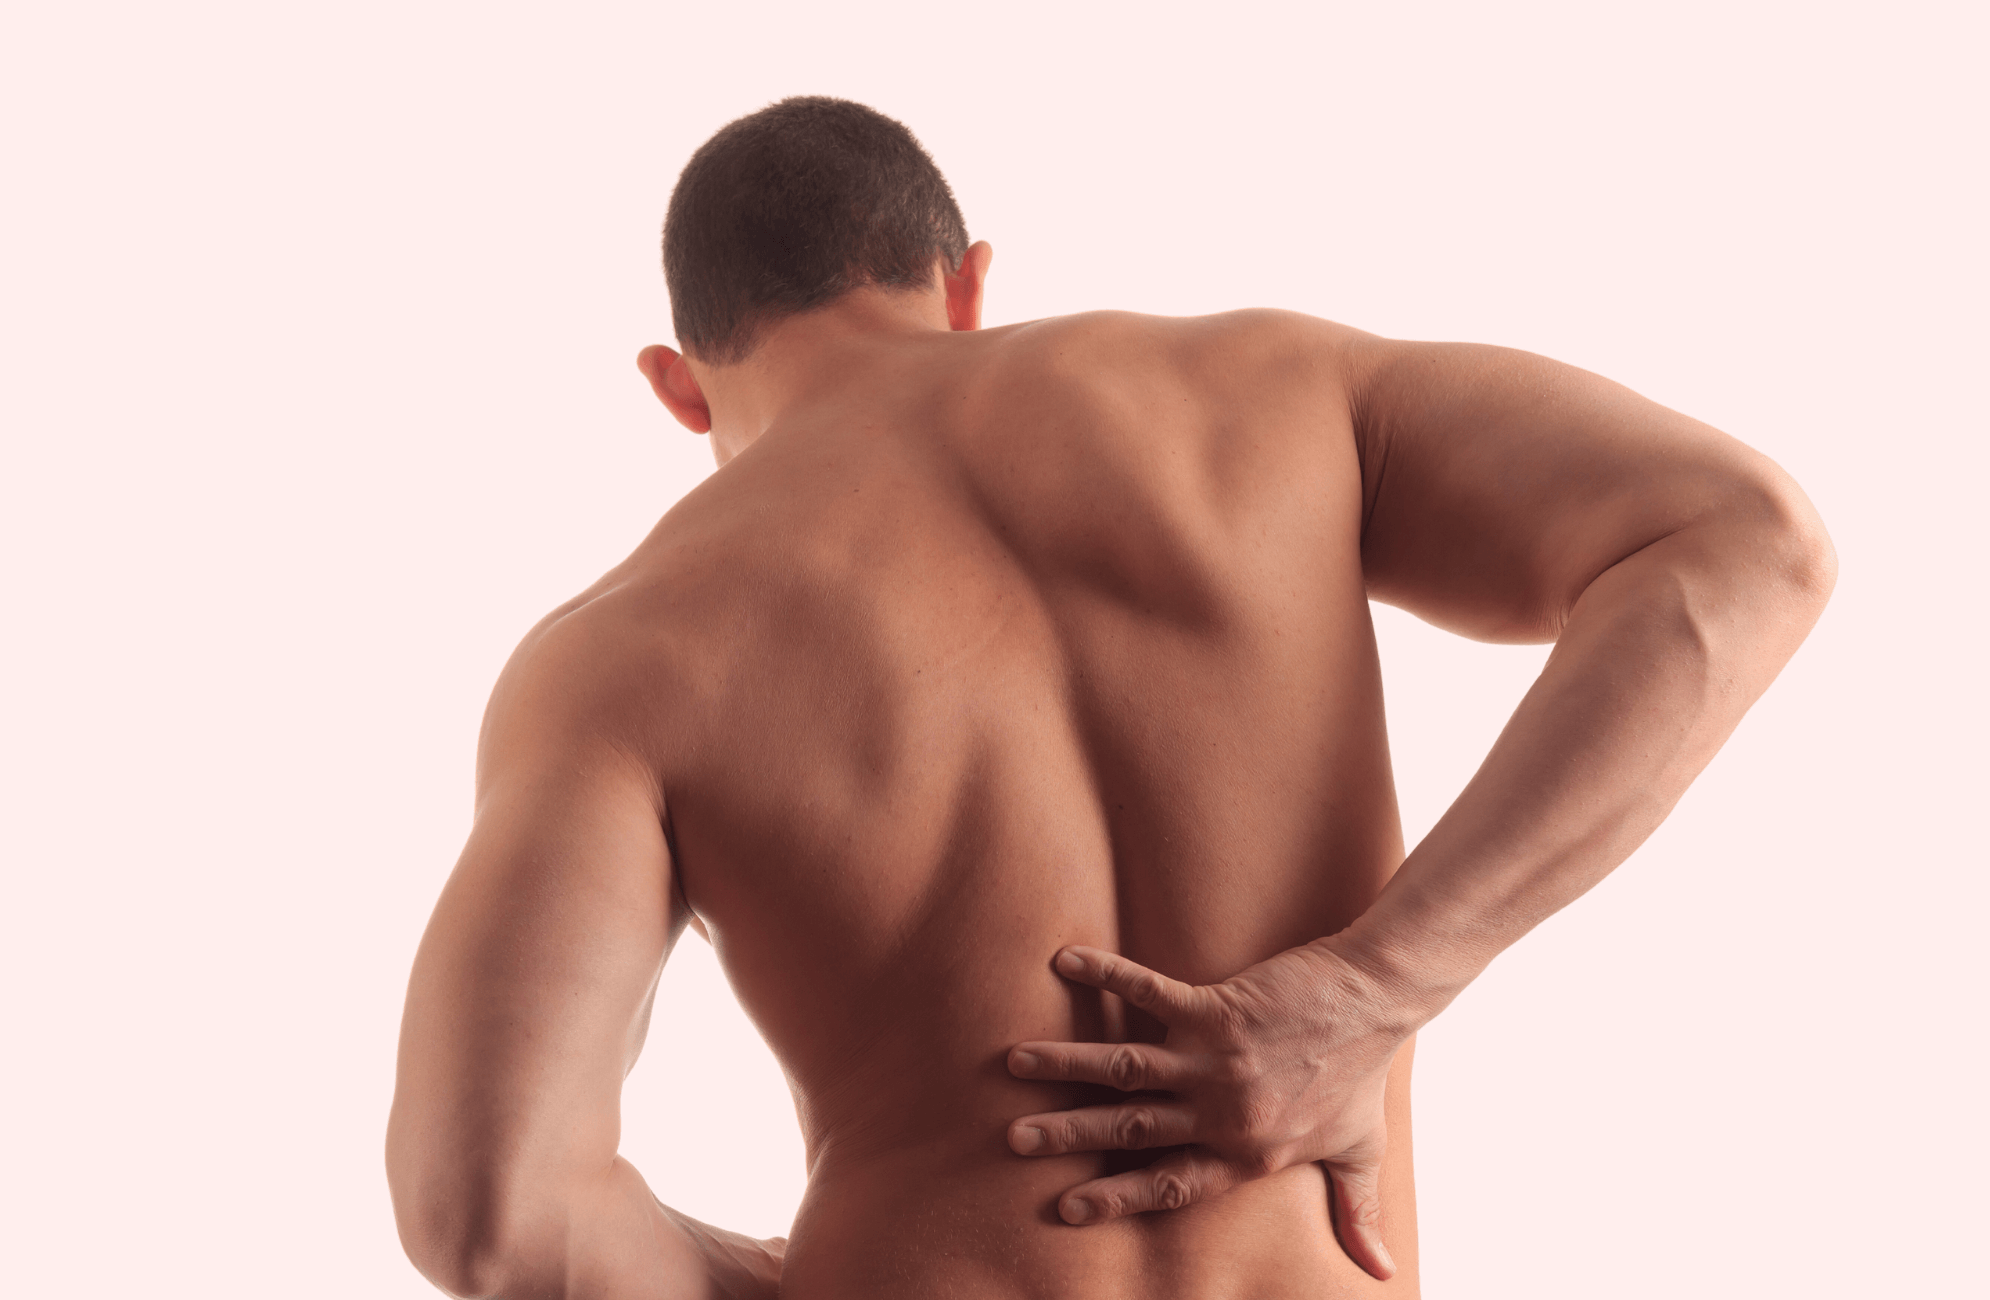 Shirtless man holds on to back because he is in pain.